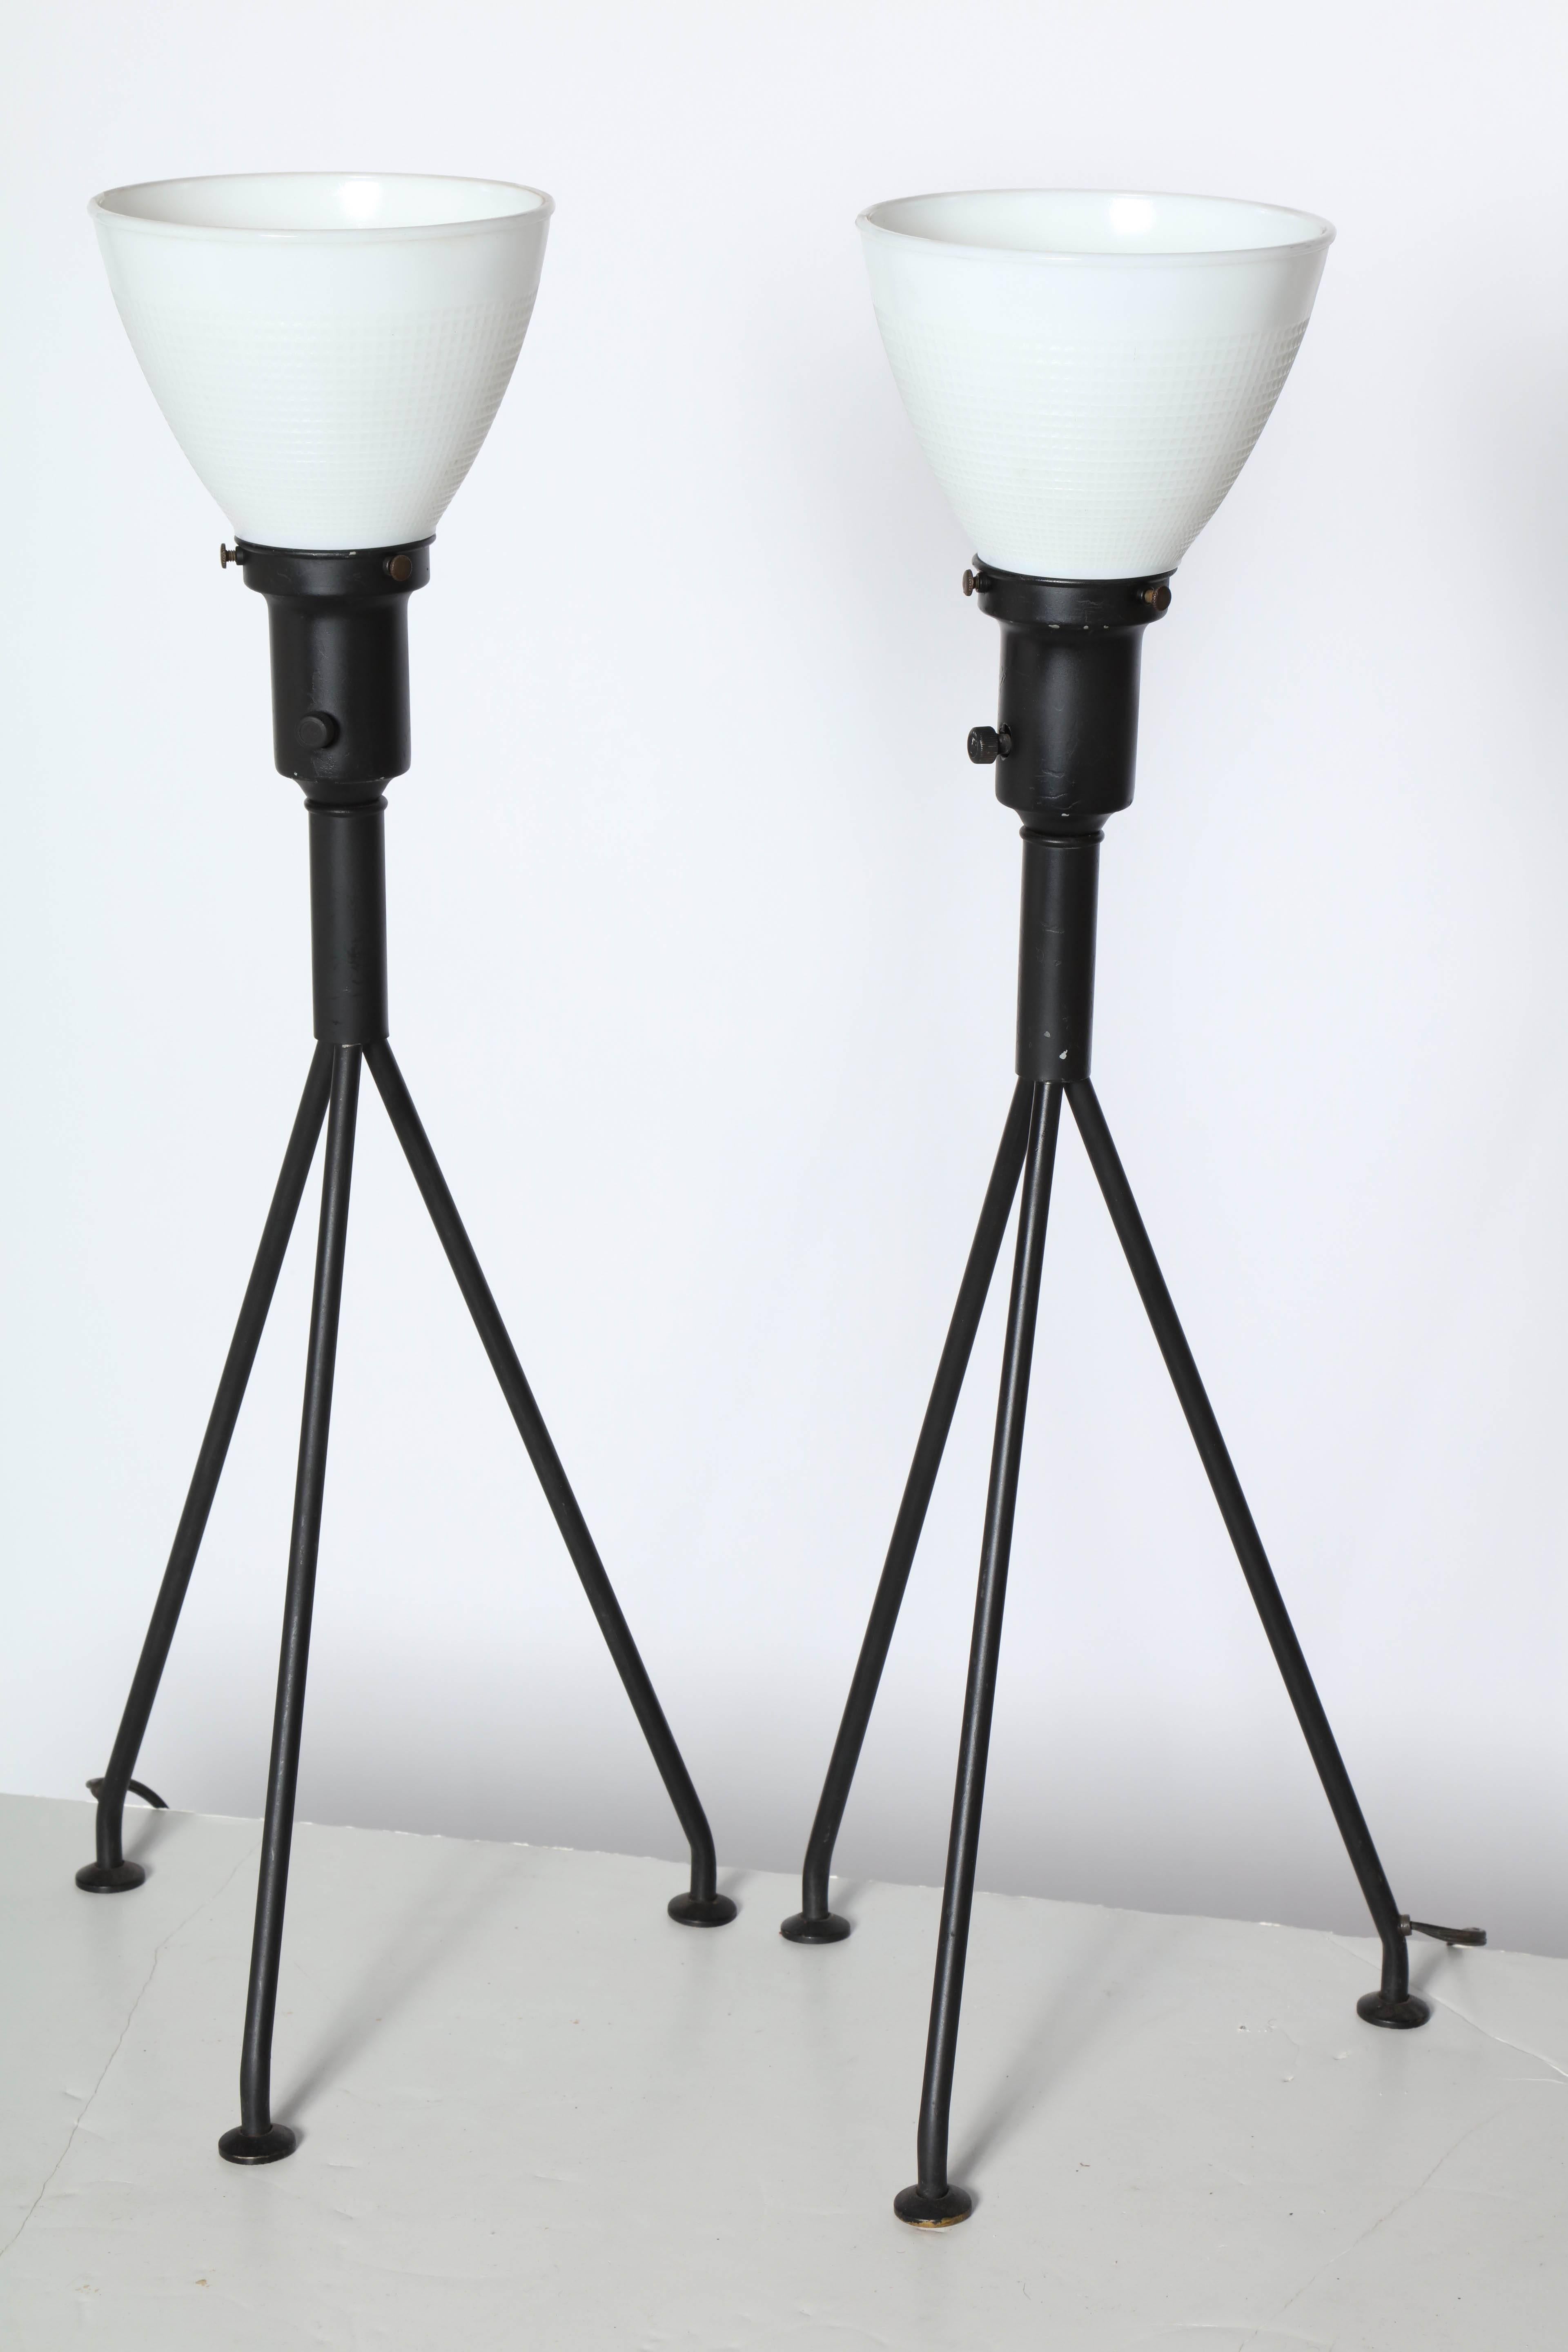 Pair of Gerald Thurston Black Iron Tripod Table Lamps with White Glass Shades 1